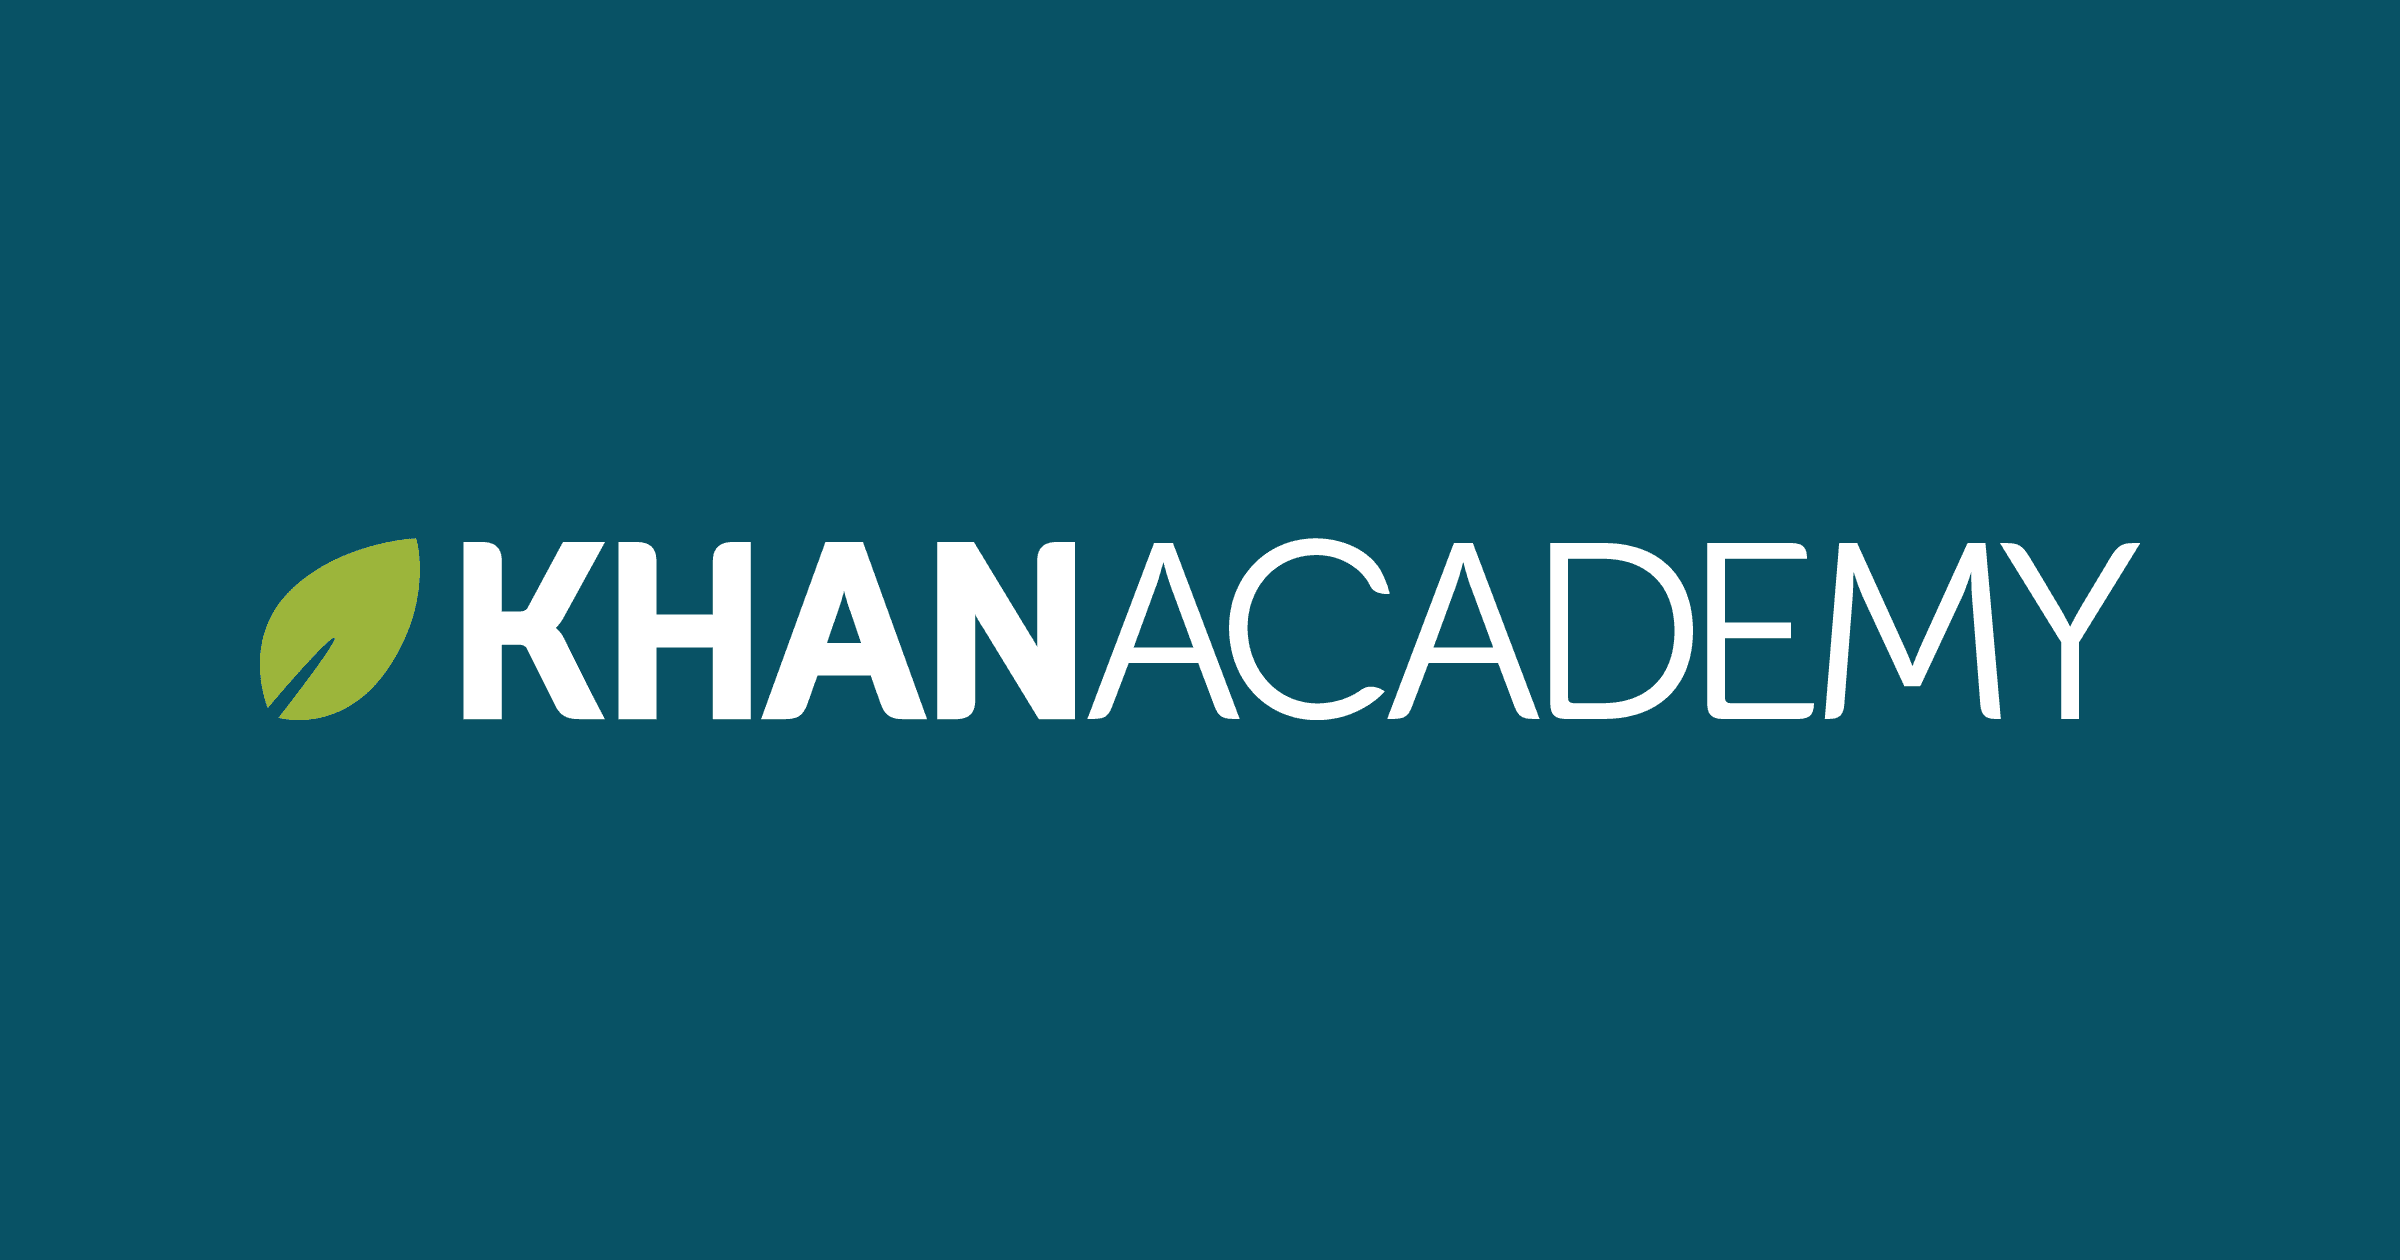 Khan Academy application – features and advantages